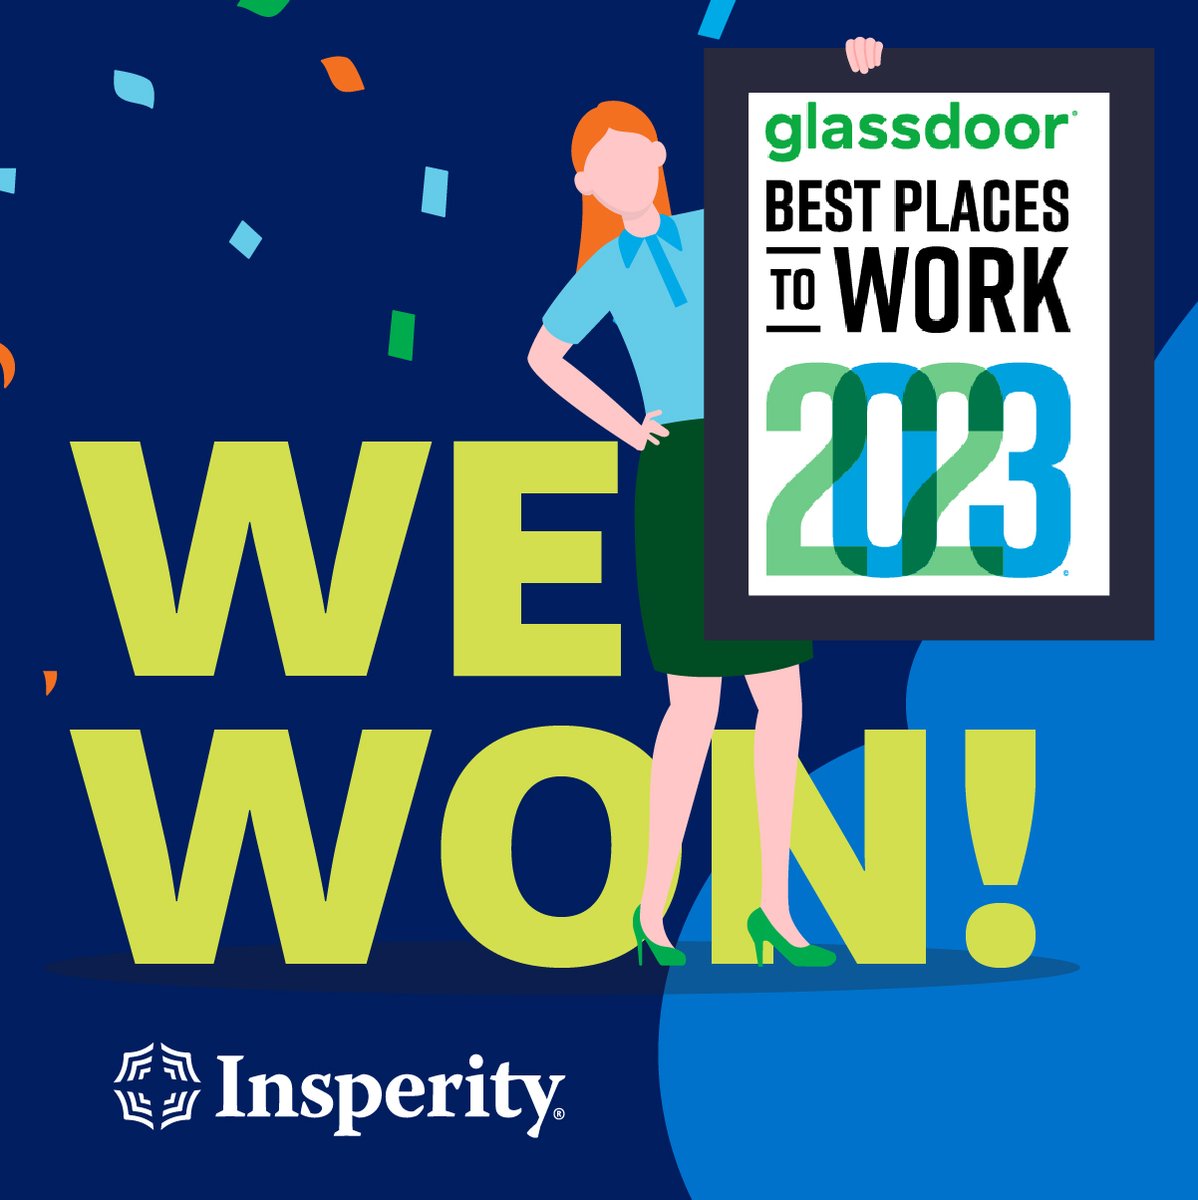 @Insperity has made the list of top 100 Best Places to Work 2023 by @glassdoor. We are #28 on the list, and I am so proud to work for a company that not only do I love, but others do too! bit.ly/3CDHFlB  

#TakeCareofYourPeople #GlassdoorBPTW